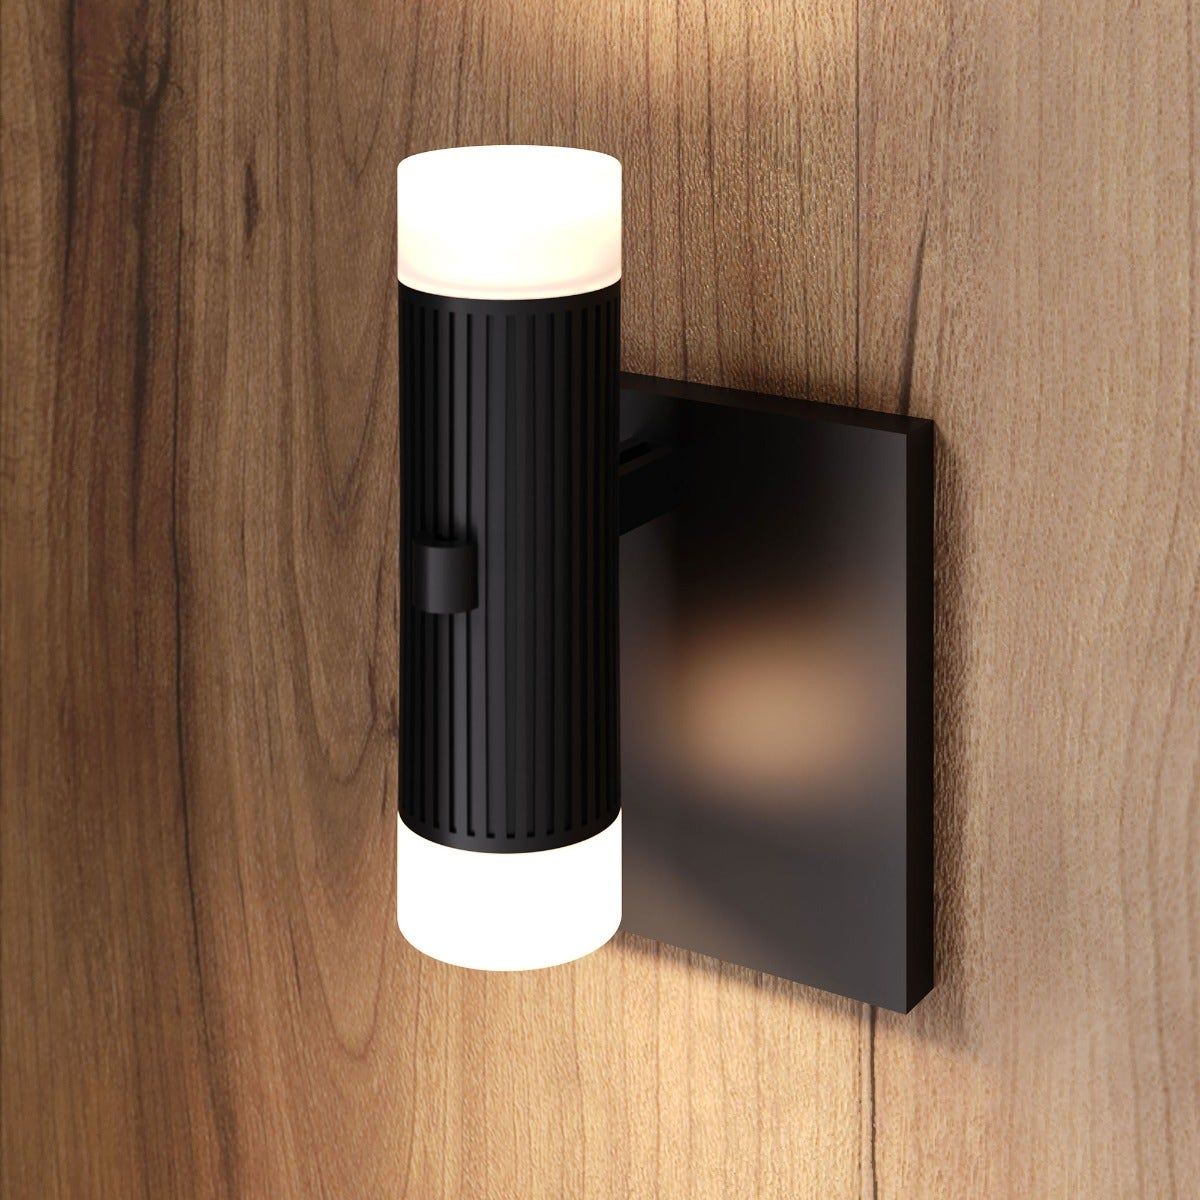 Suspenders Standard Single Sconce with Bar-Mounted Duplex Cylinders with Glass Drum Diffusers